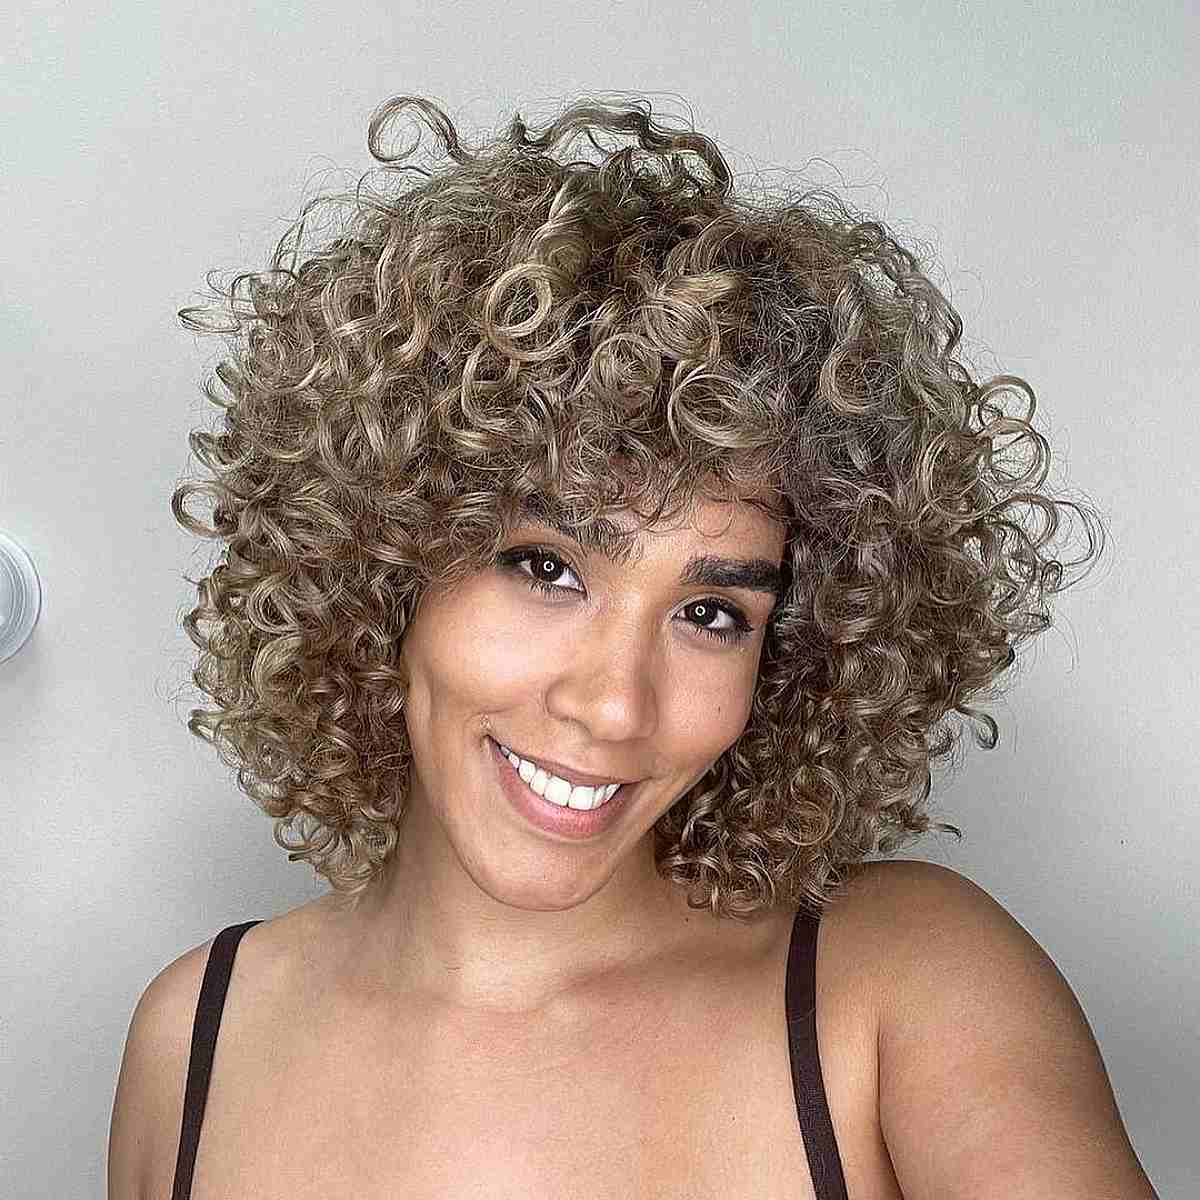 Beautiful Blonde Curls with Fringe